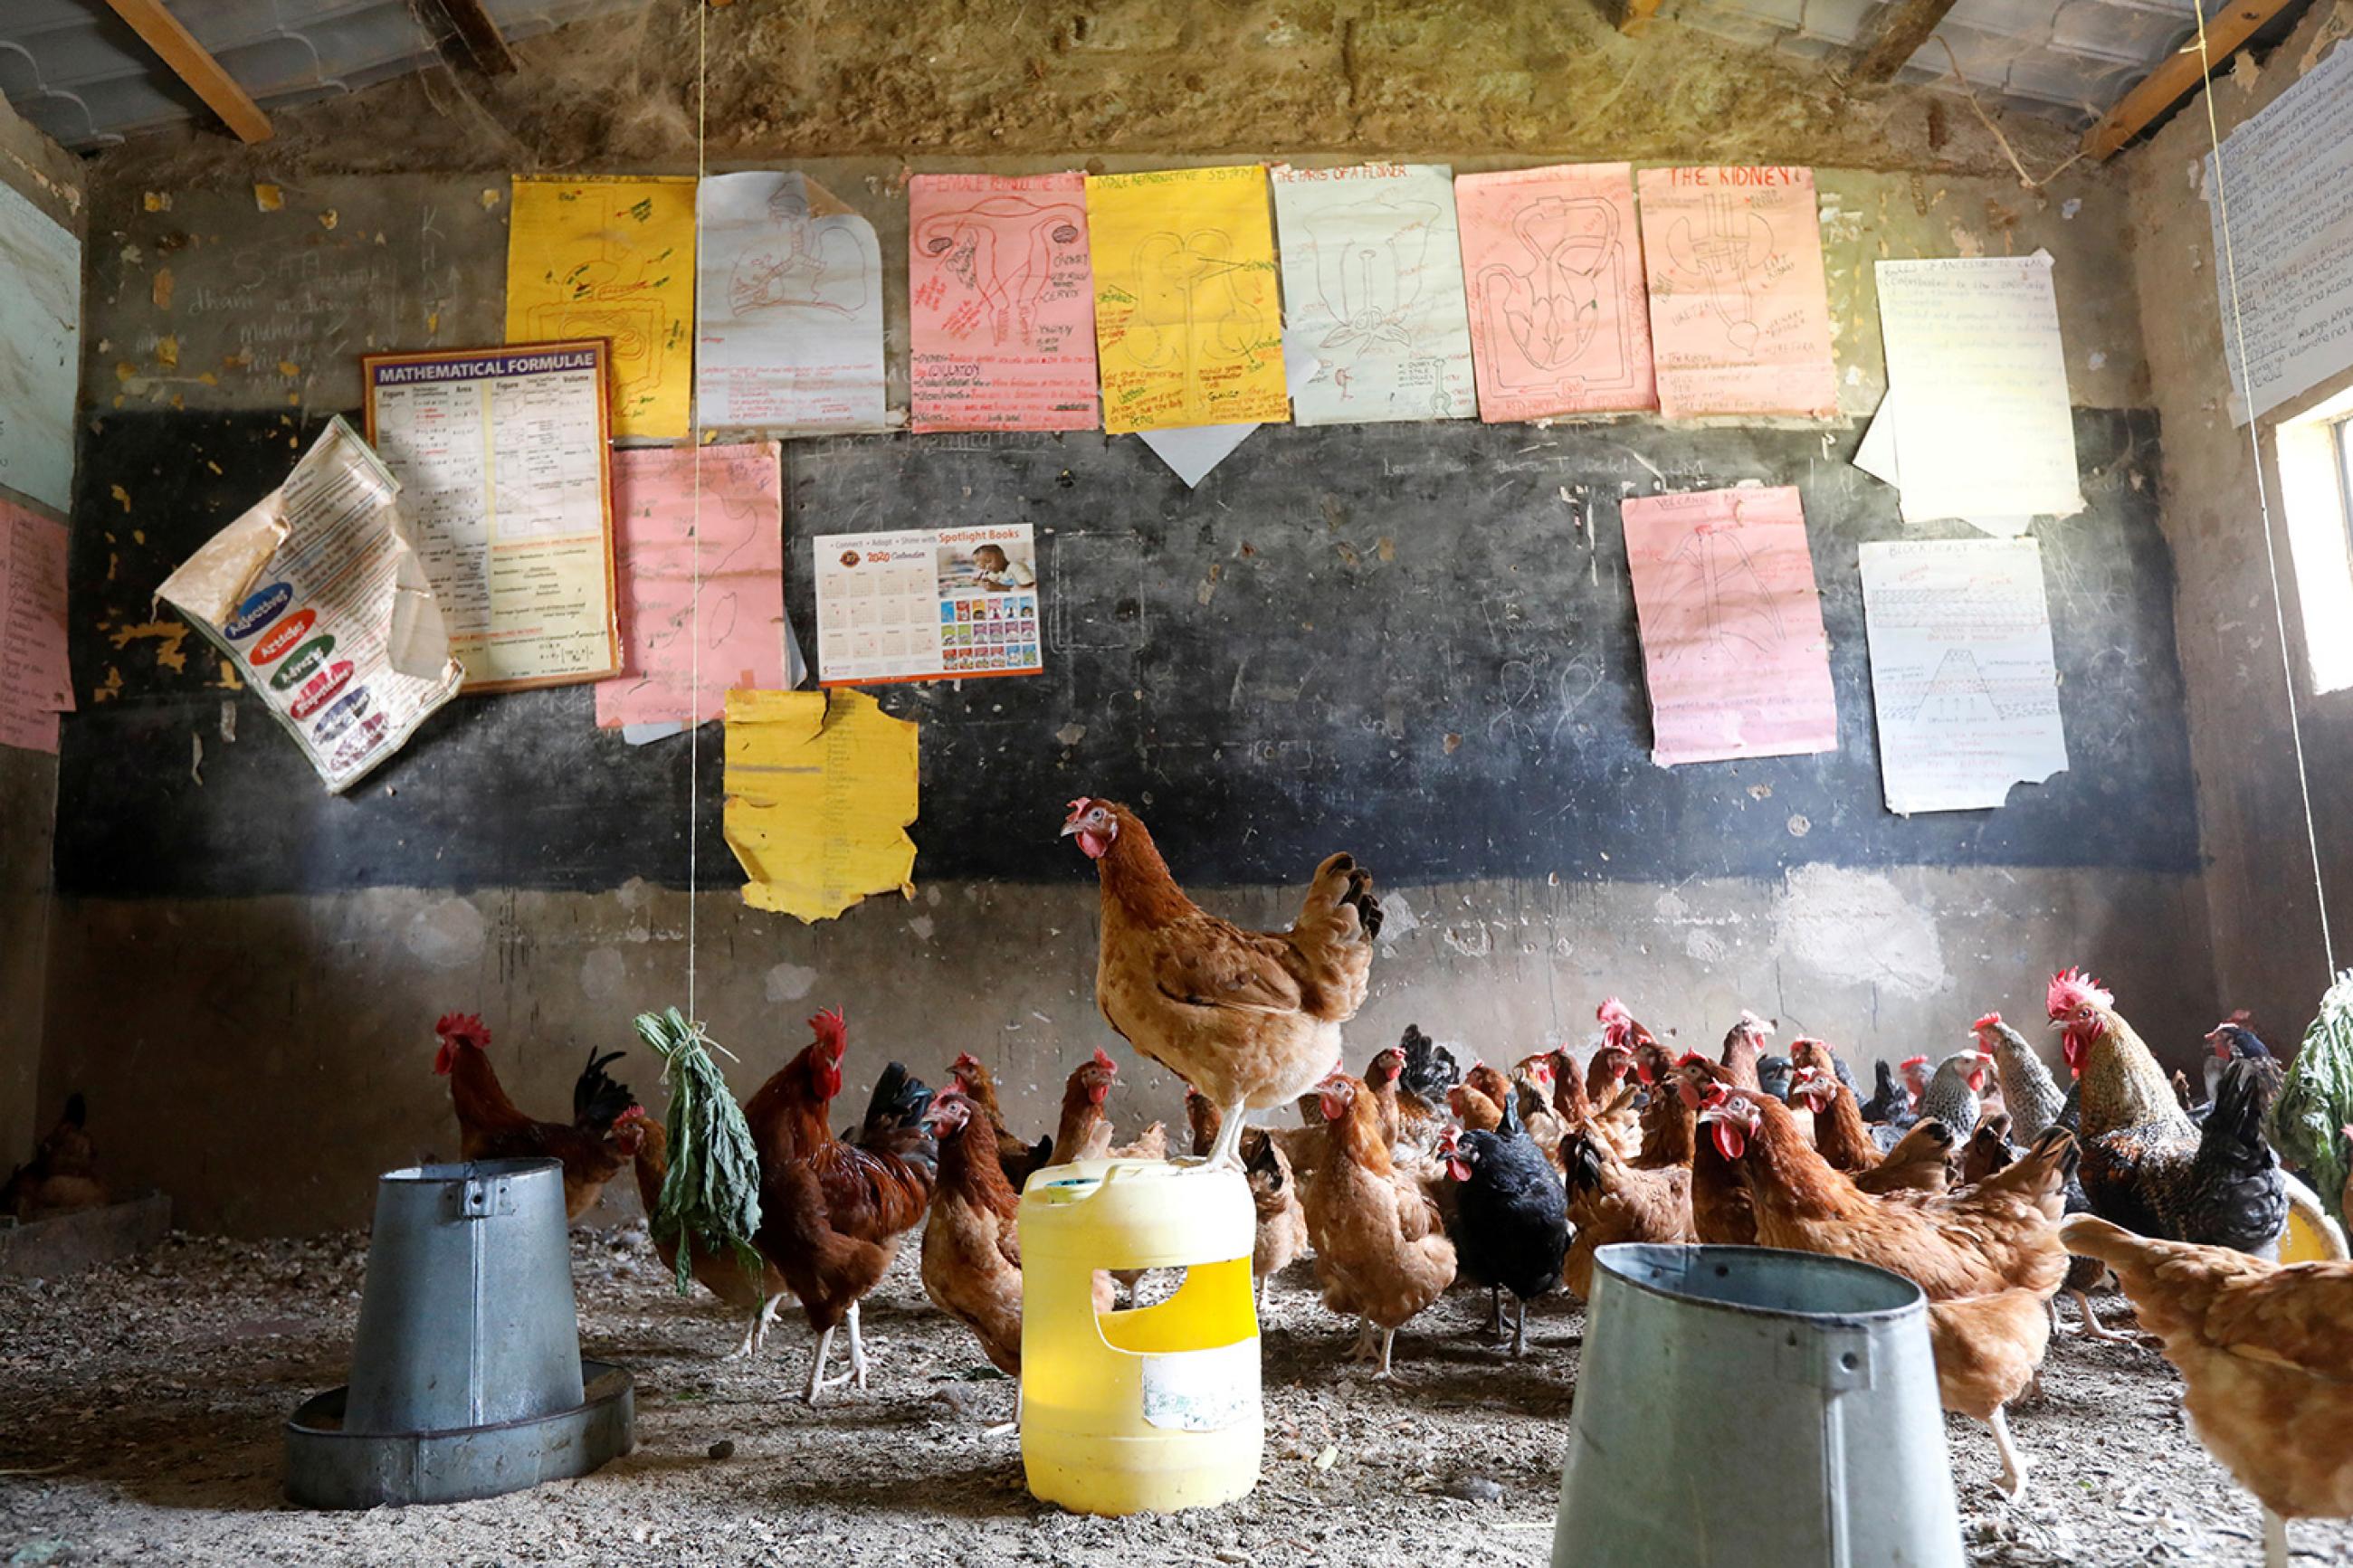 Education in Africa is being disrupted along with everything else—chickens here in a classroom converted into a poultry house because of COVID-19 in the town of Wang'uru, Kenya, on August 28, 2020. Picture shows a large gaggle of chickens inside a classroom, clucking around. One stands atop an overturned bucket. REUTERS/Baz Ratner 